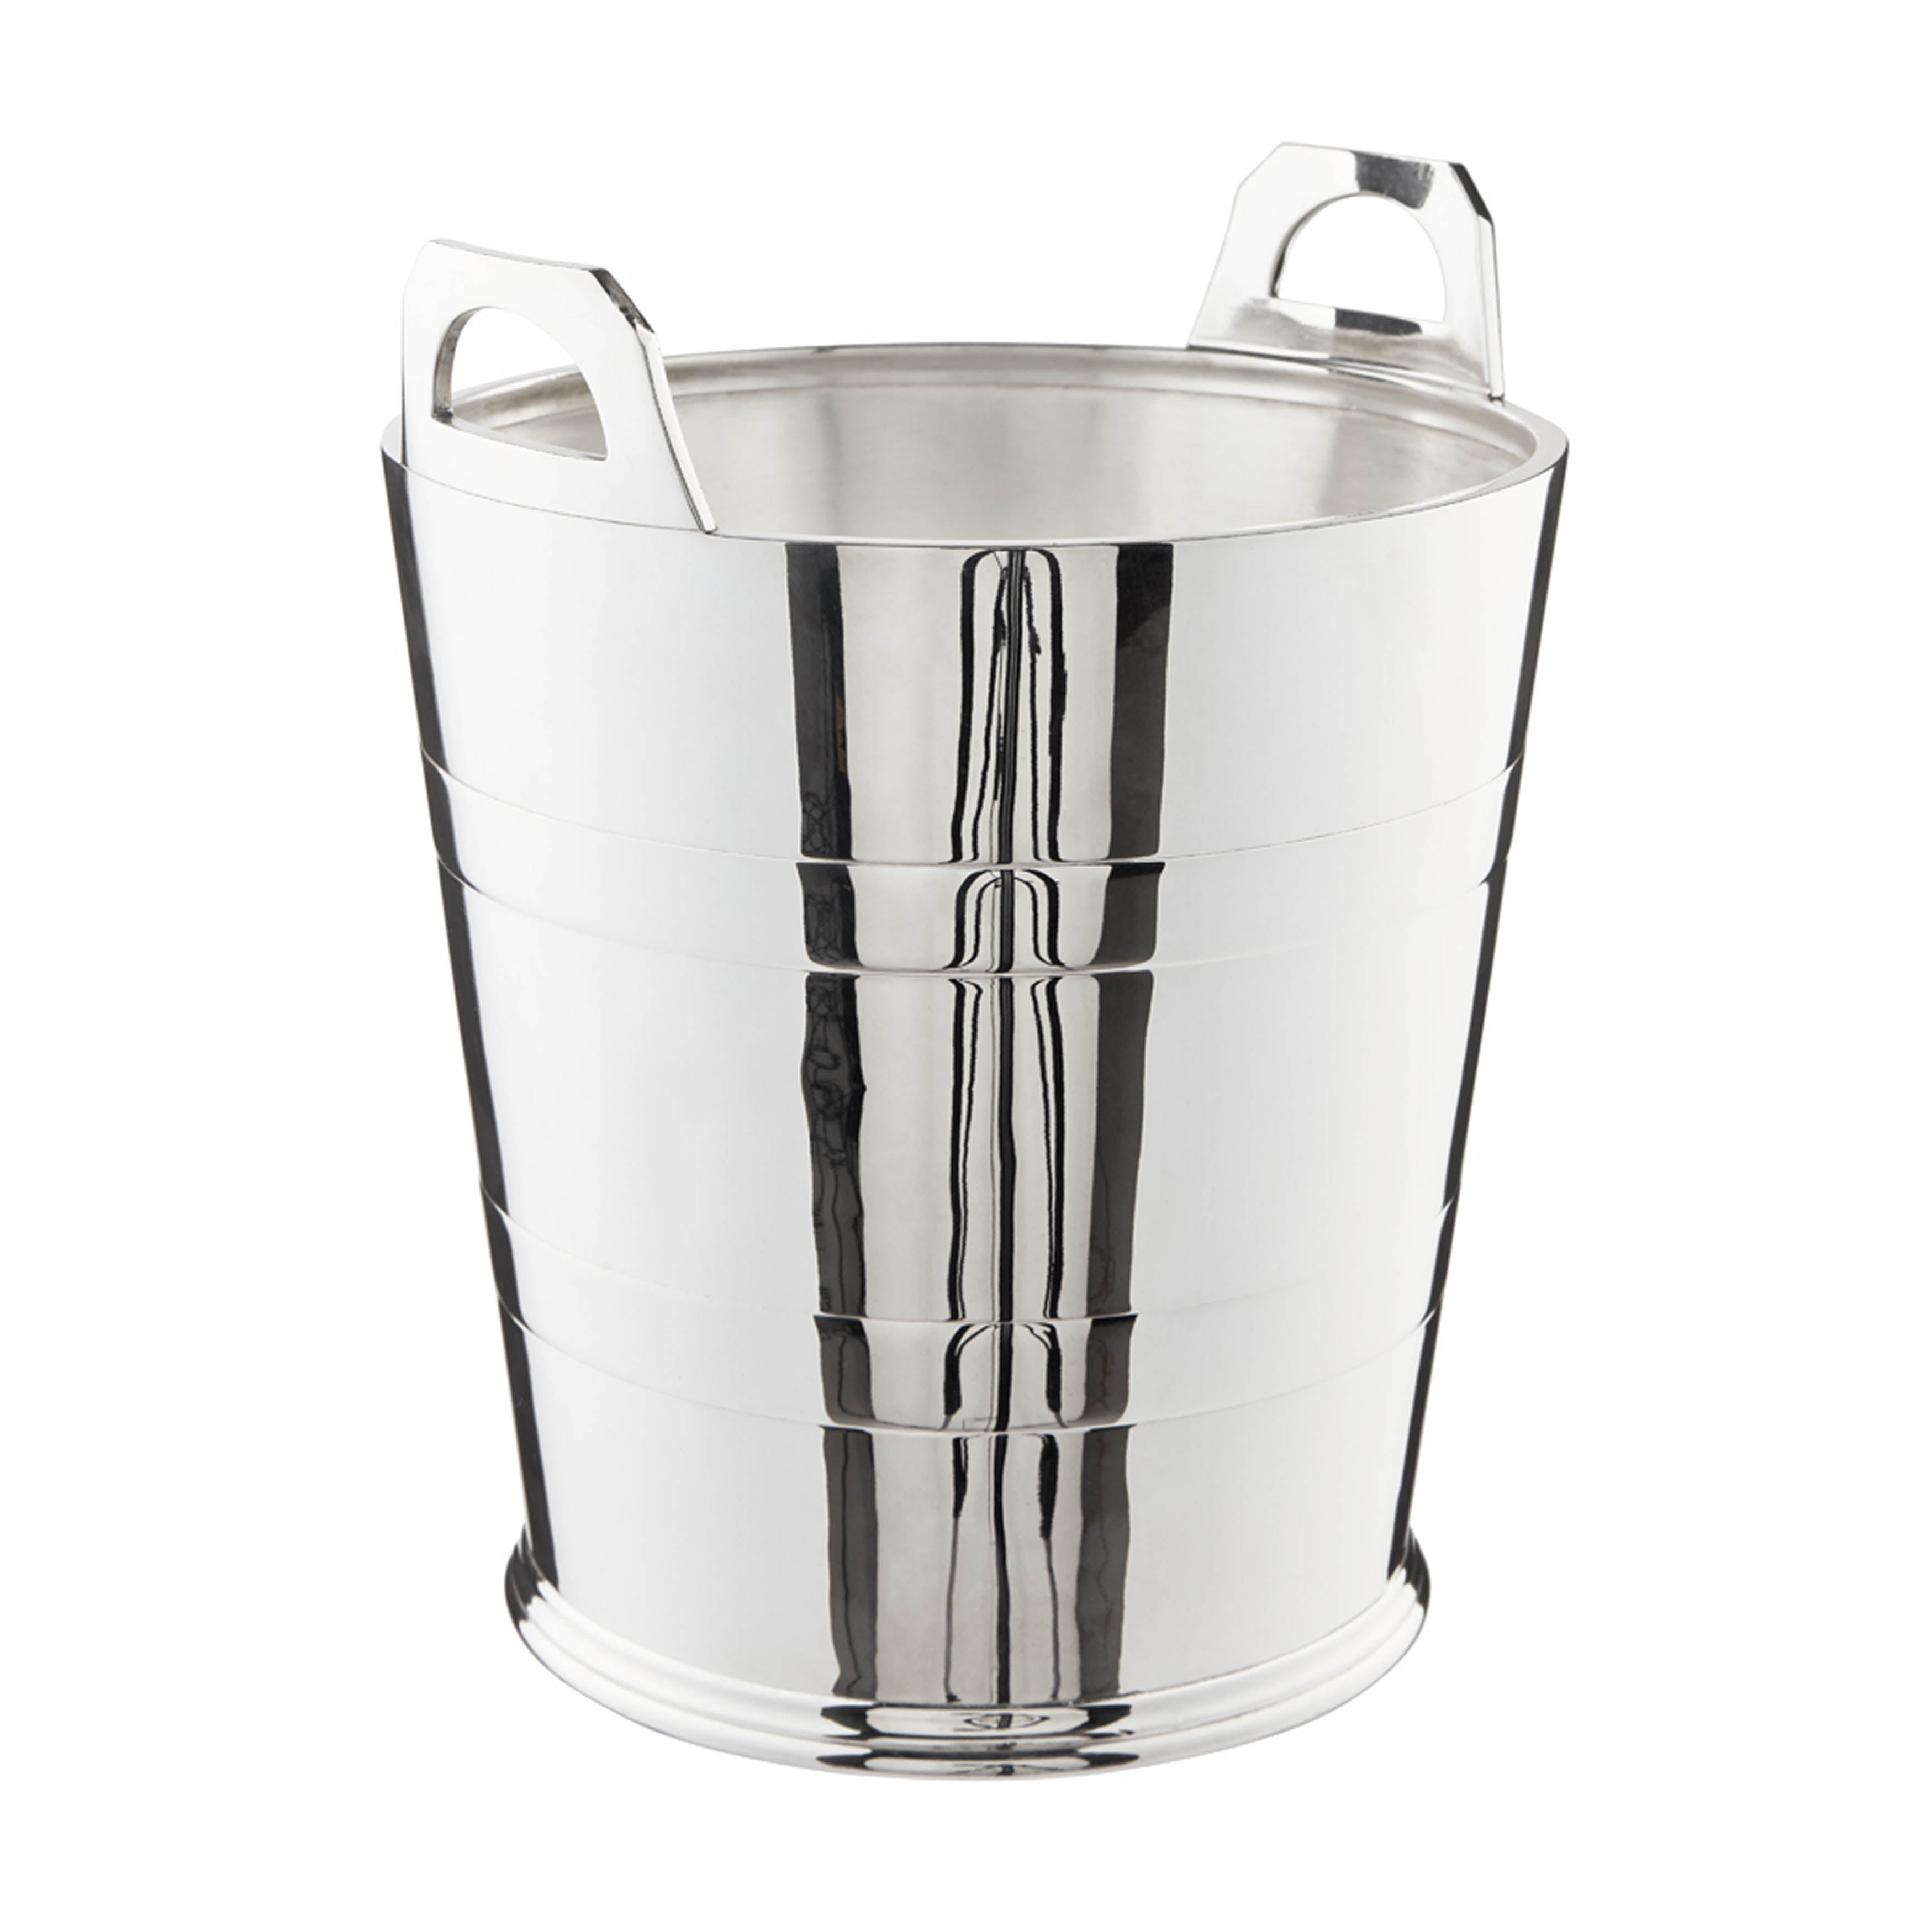 Antique Art Deco Silver Plated Large Ice Bucket c. 1920